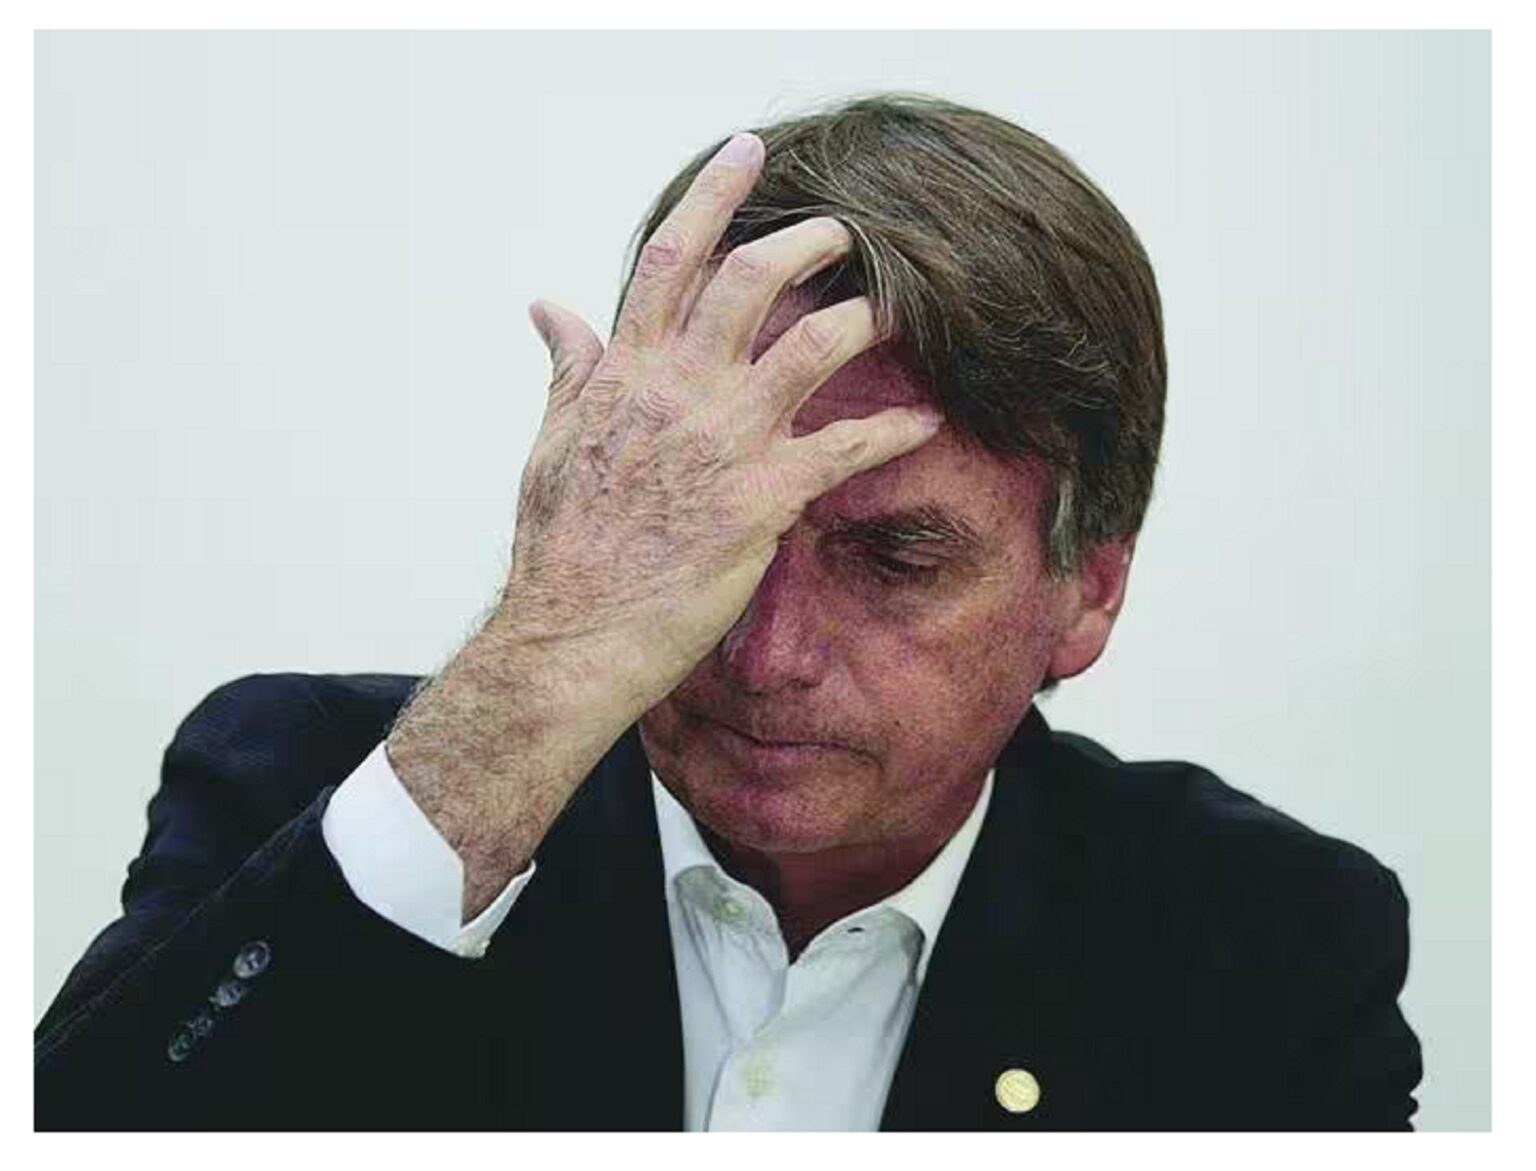 A disqualified Bolsonaro could be held accountable for other crimes in Brazil